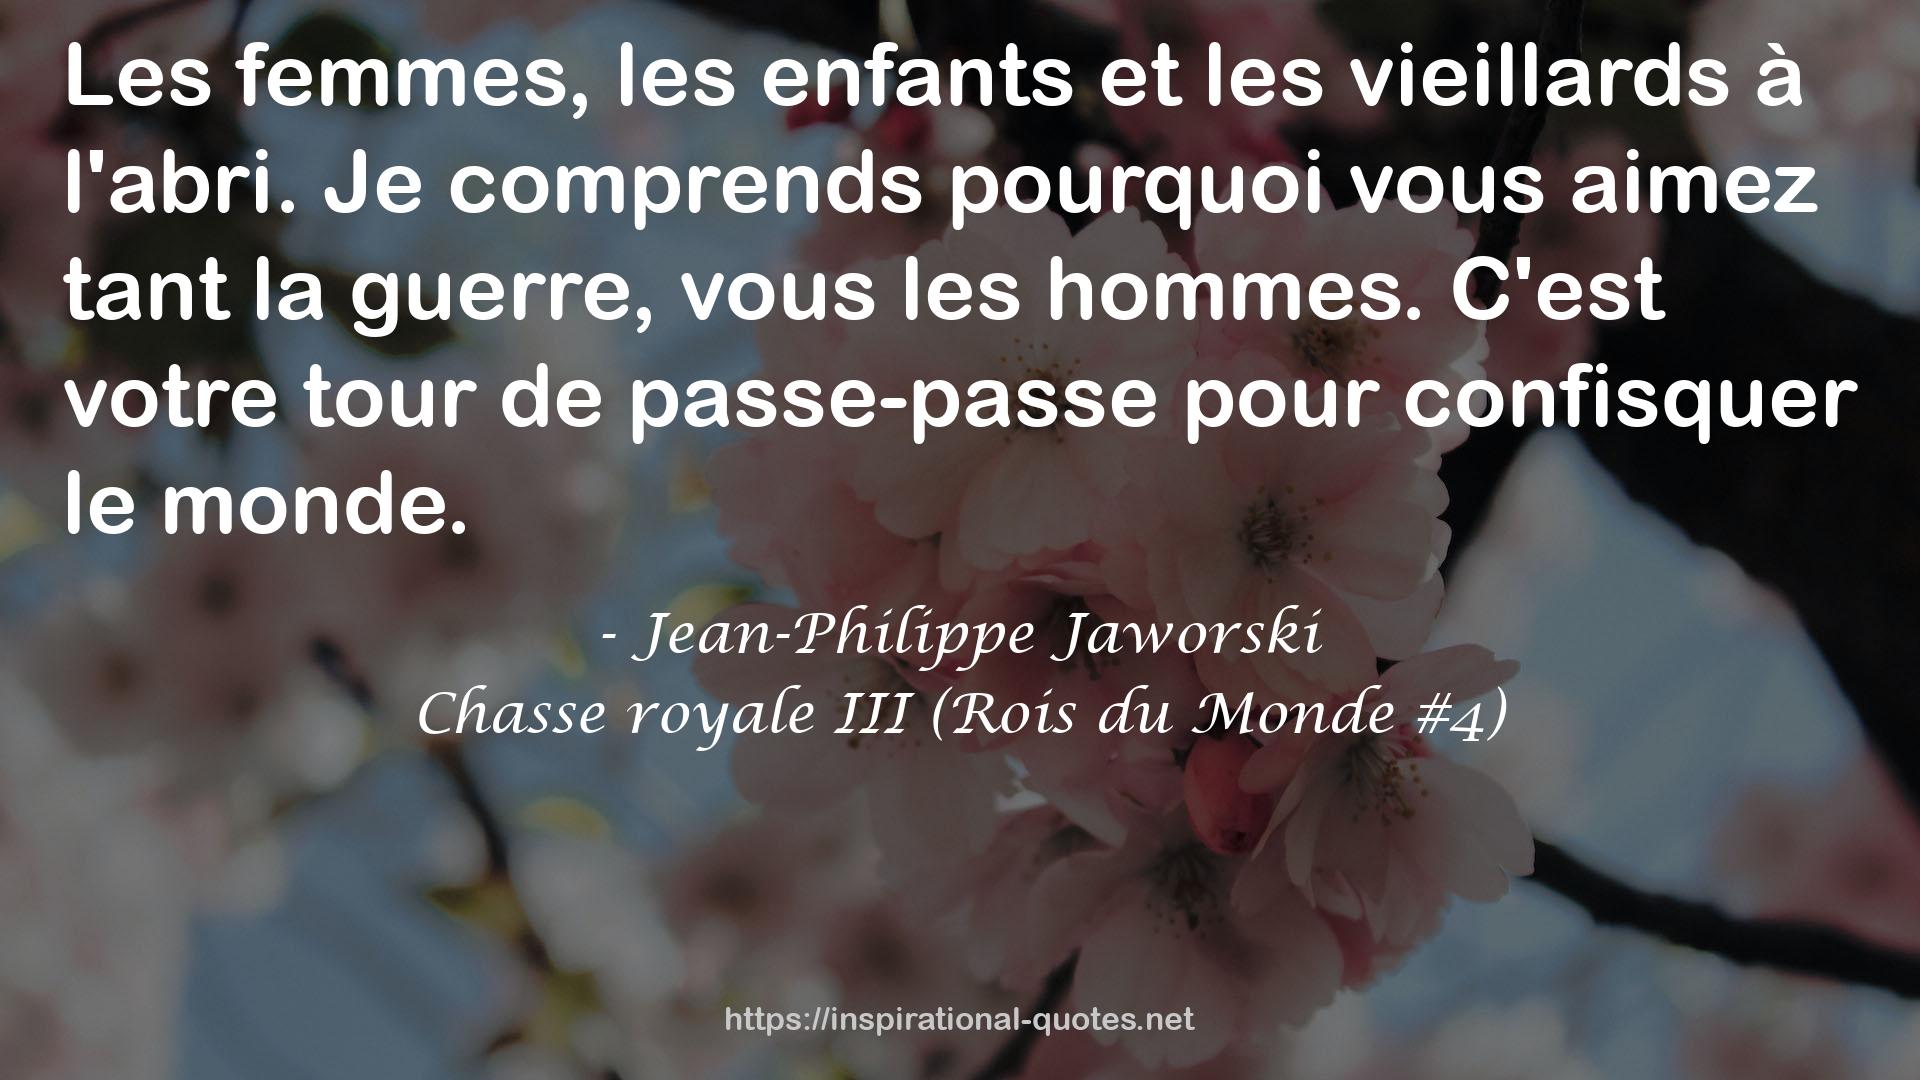 Chasse royale III (Rois du Monde #4) QUOTES